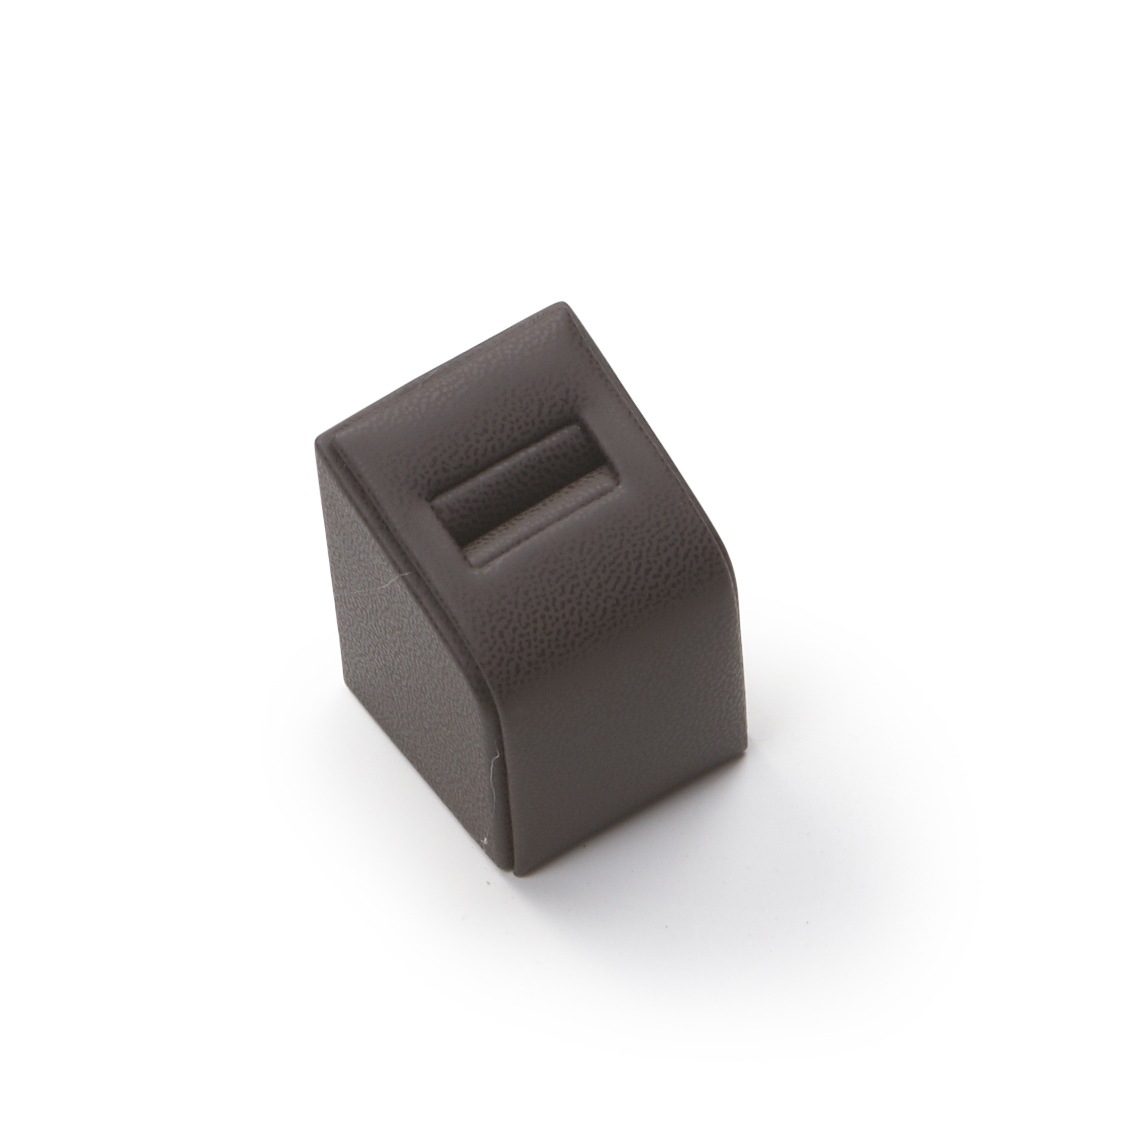 Chocolate Leatherette 1 Ring Slot Stand